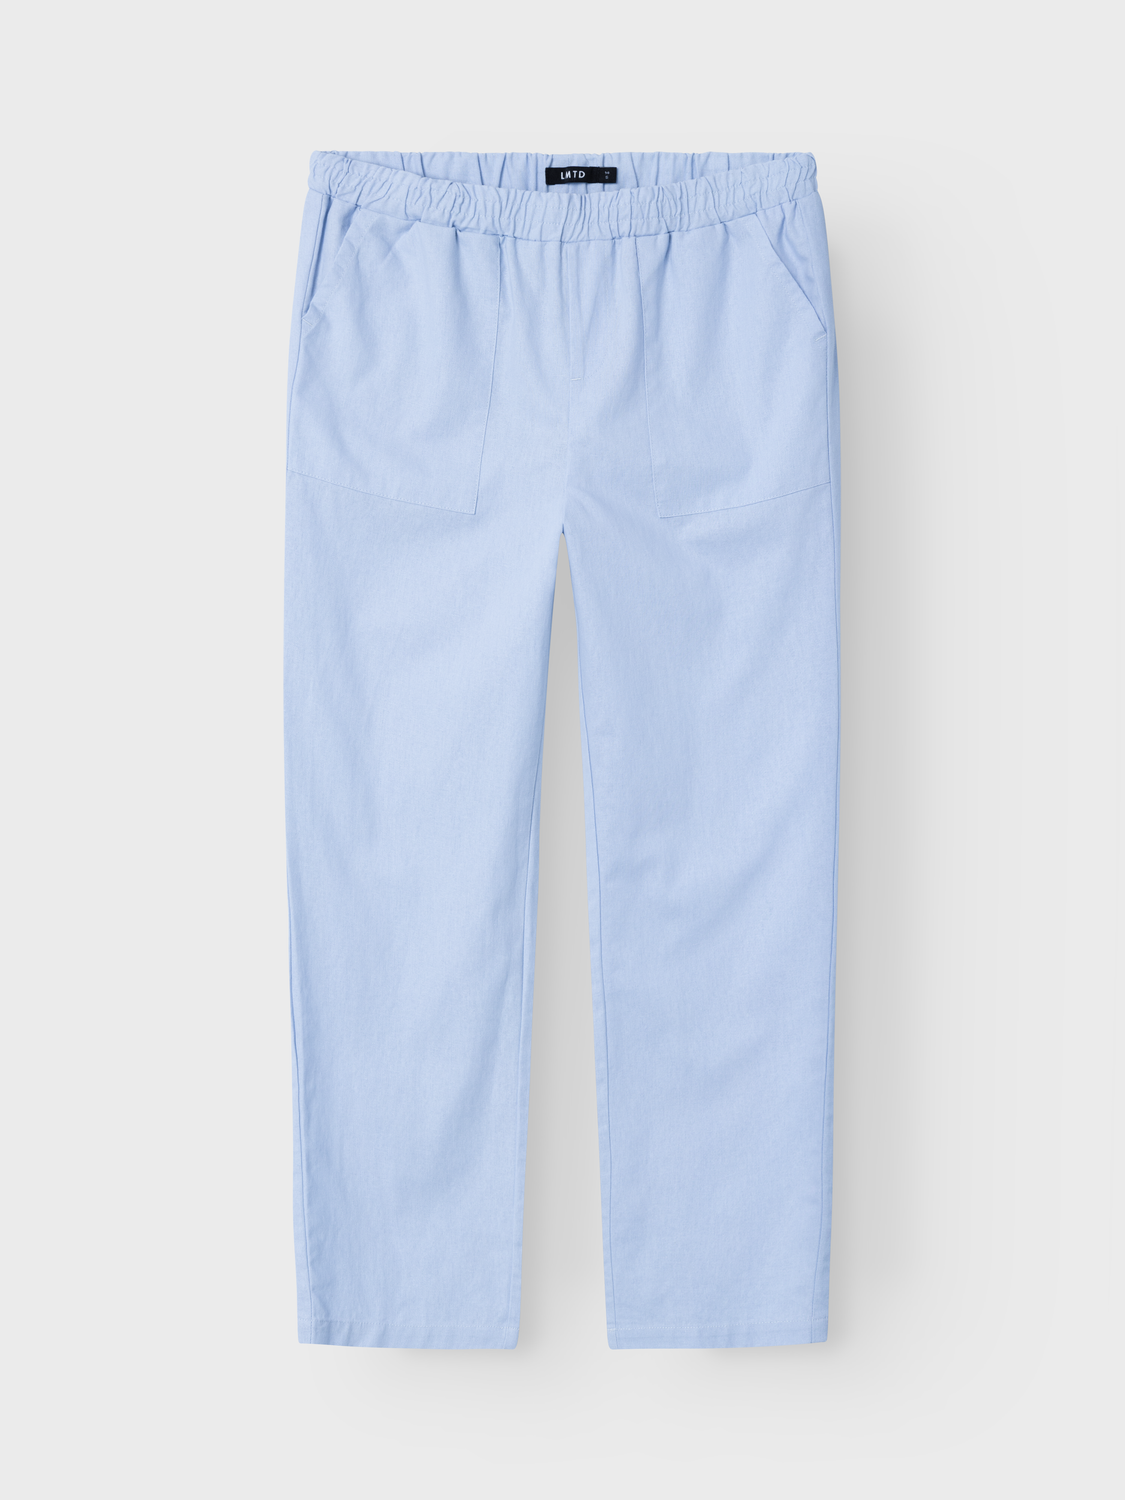 NLFHILL Trousers - Heather